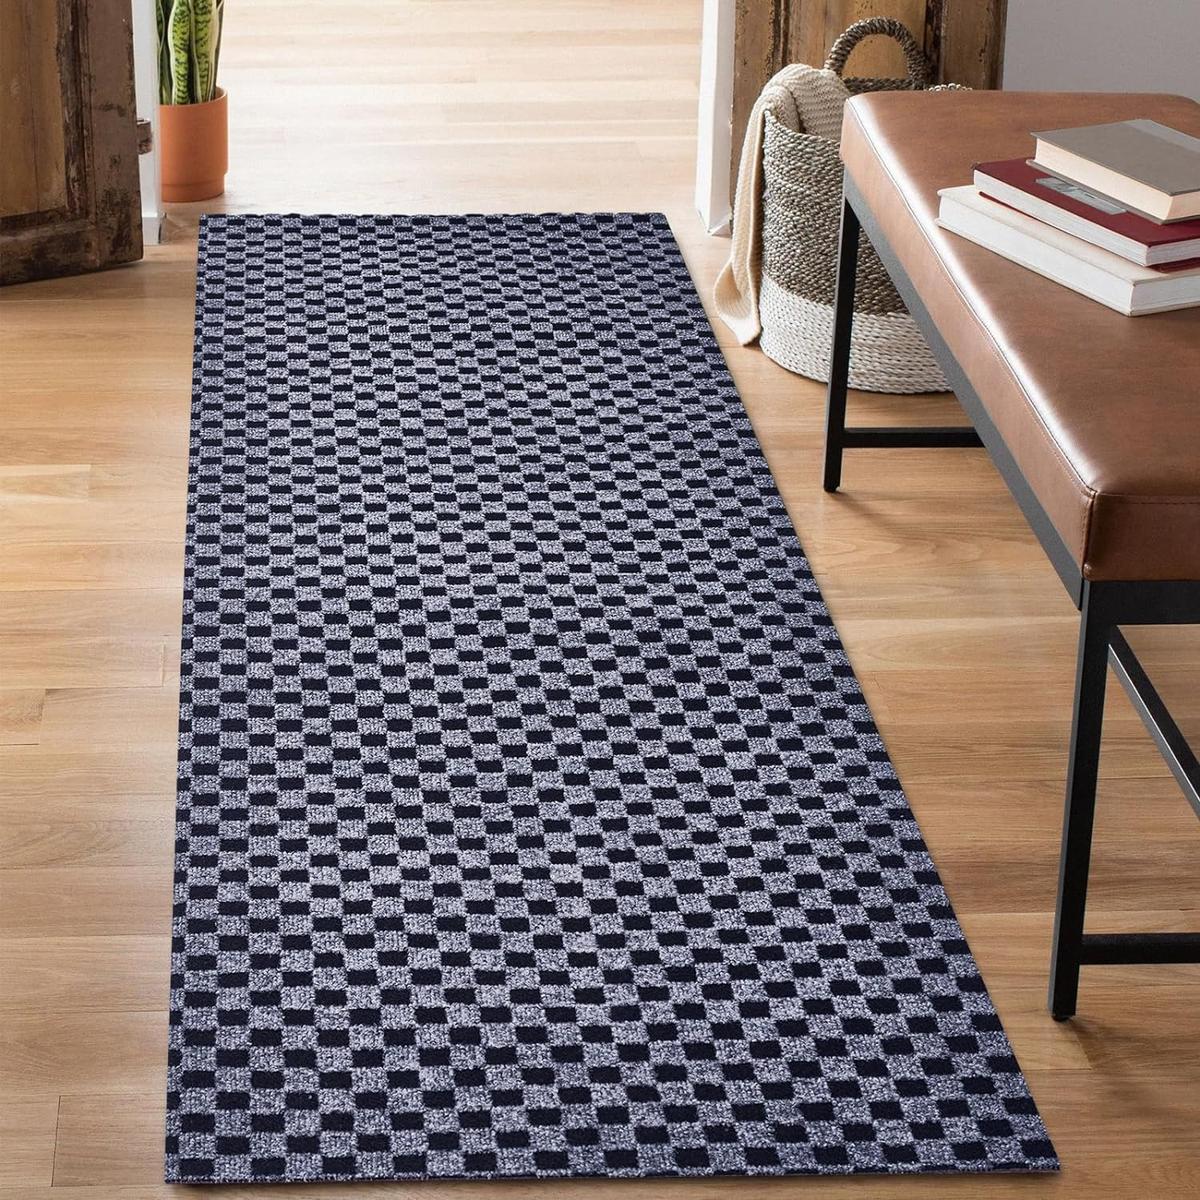 BESTVUE 2' x 8' Runner Rug with Rubber Backing, Retail $45.00